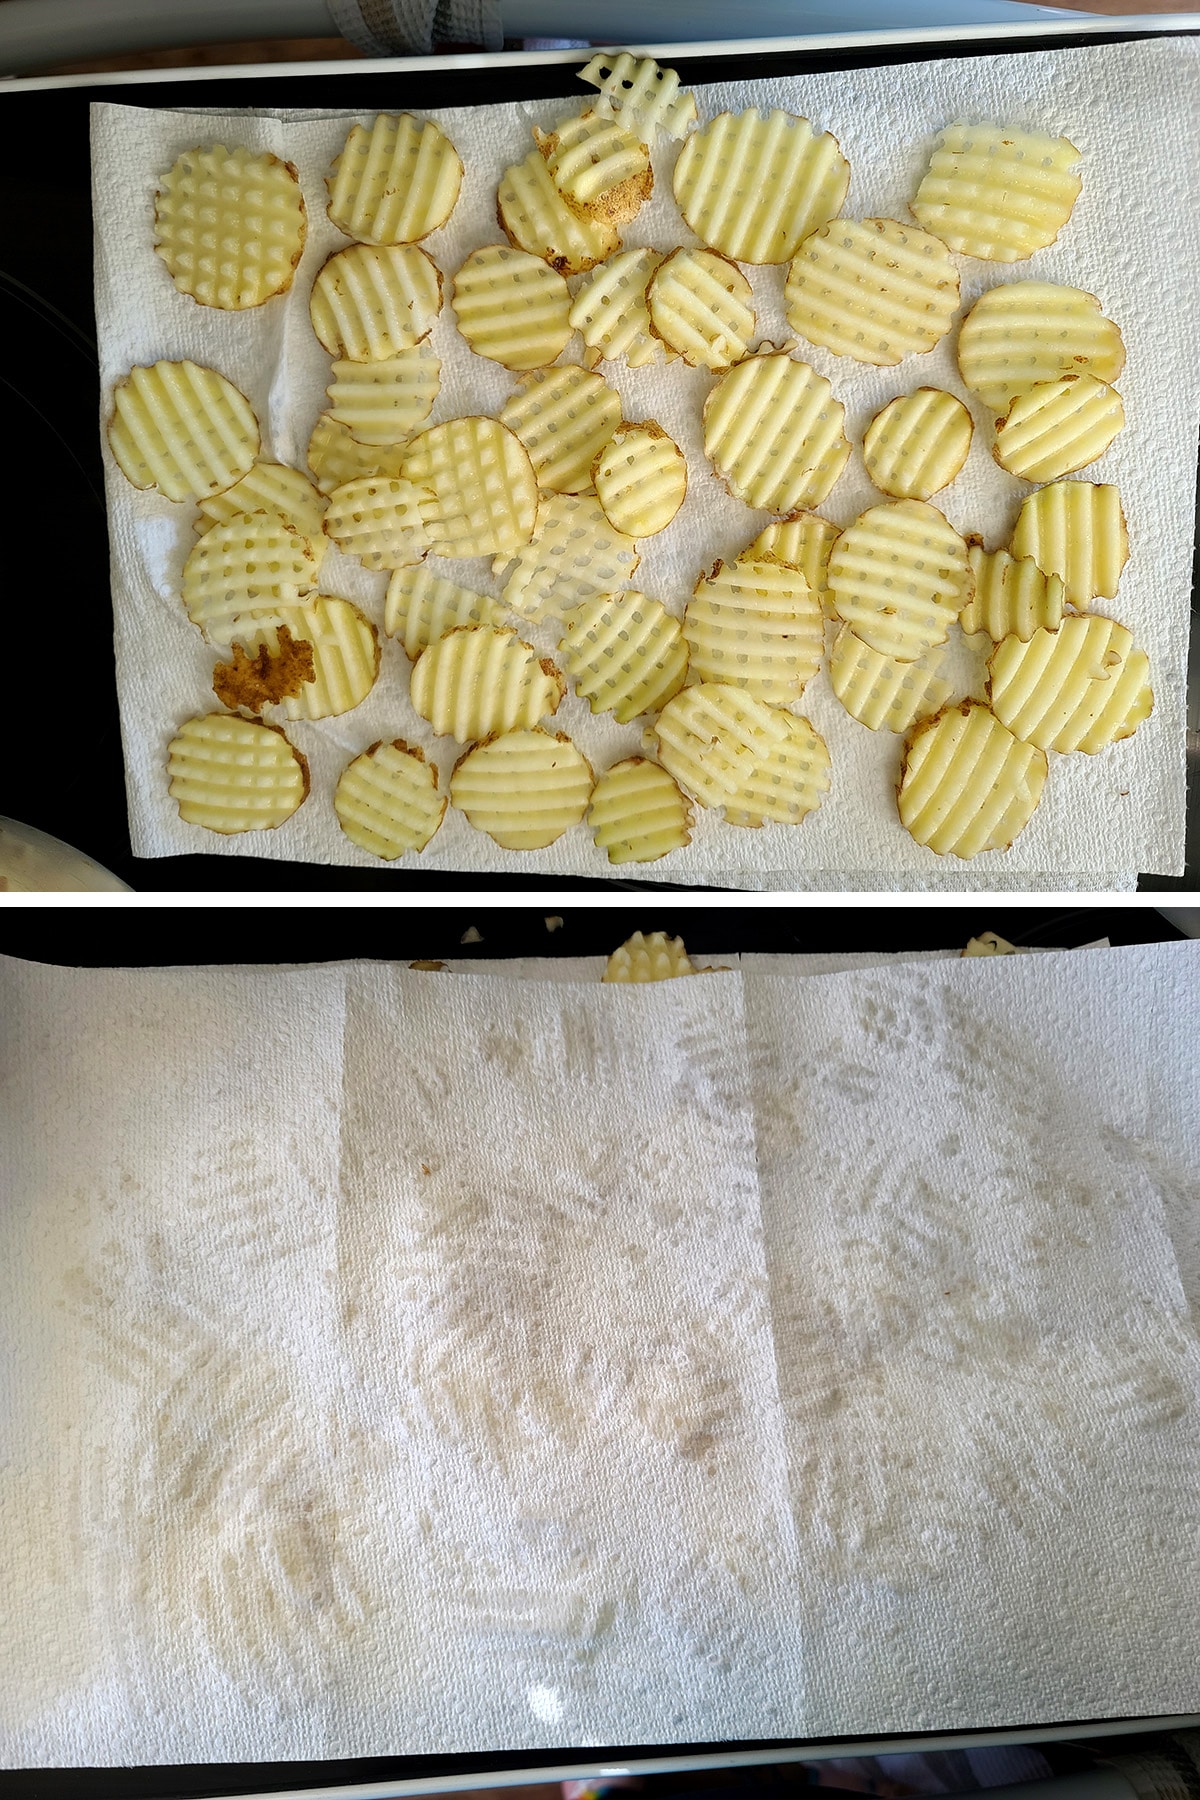 A two part compilation image, showing waffle cut potatoes on a baking sheet lined with paper towels, and then those fries covered with another layer of paper towels. Water marks are visible.